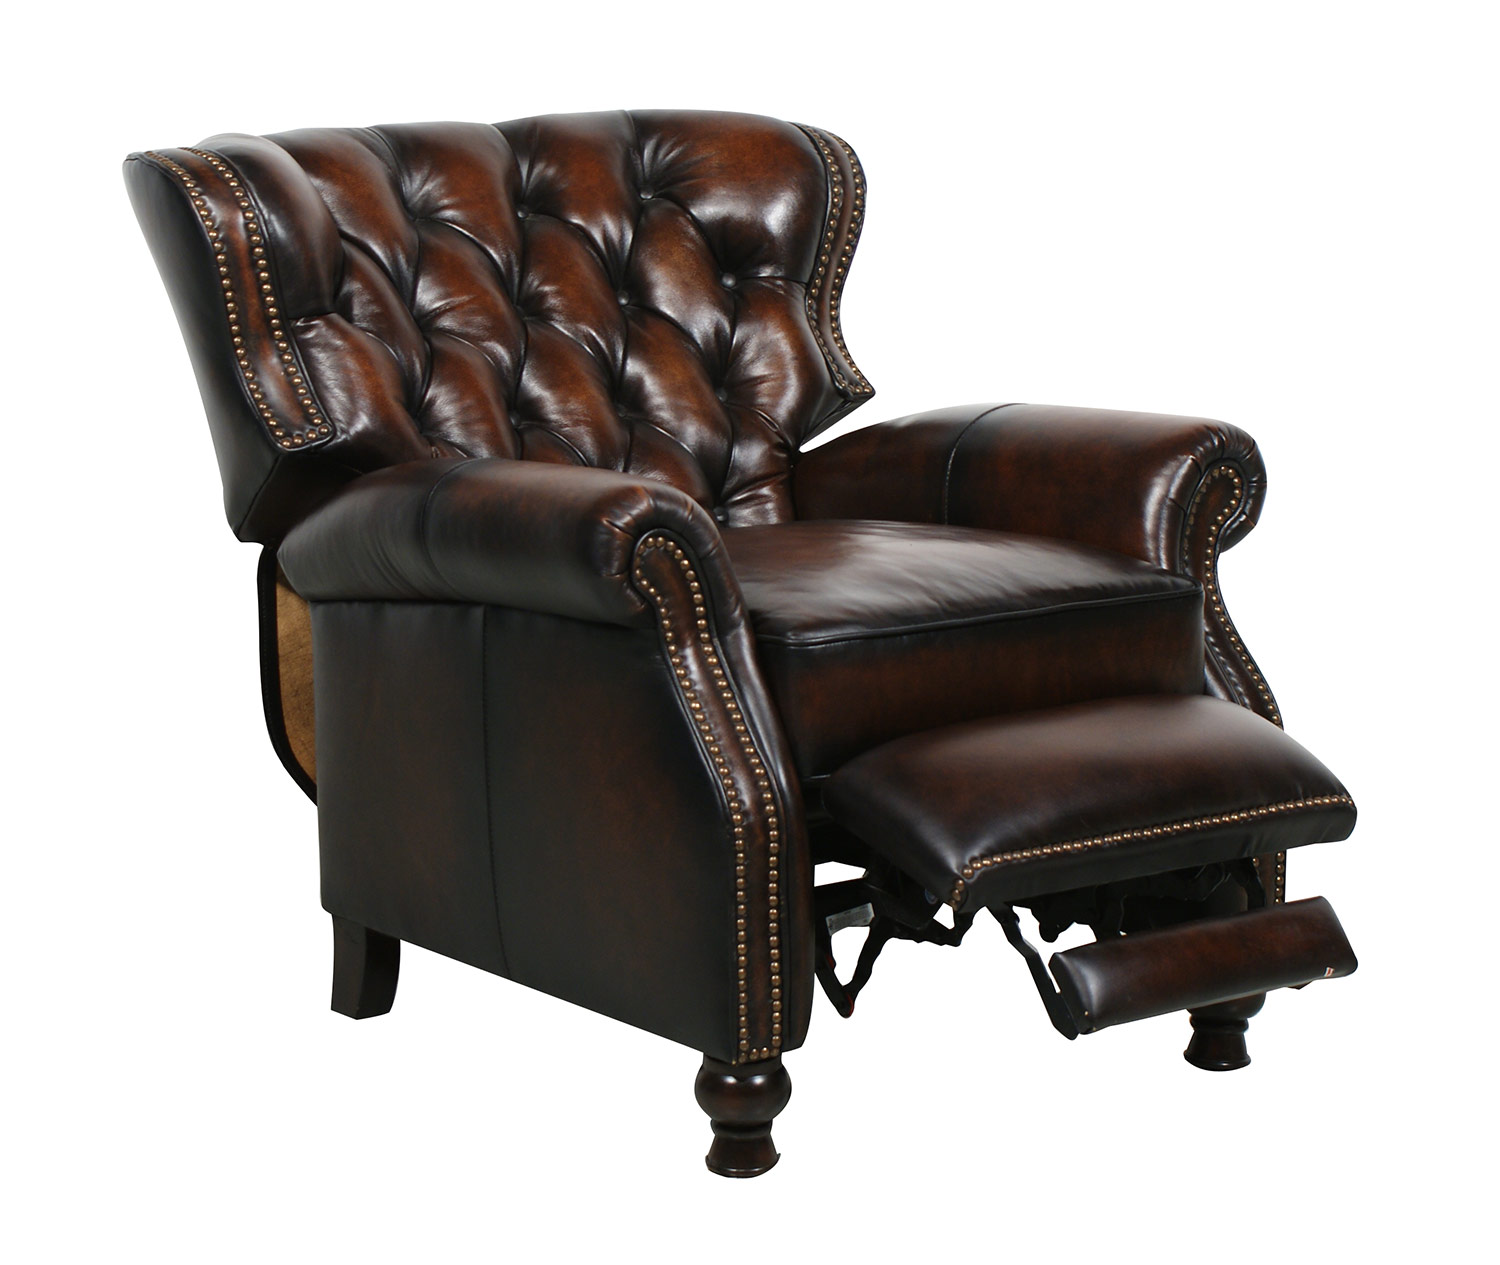 Barcalounger Presidental ll Vintage Reserve Leather Recliner - Coffee